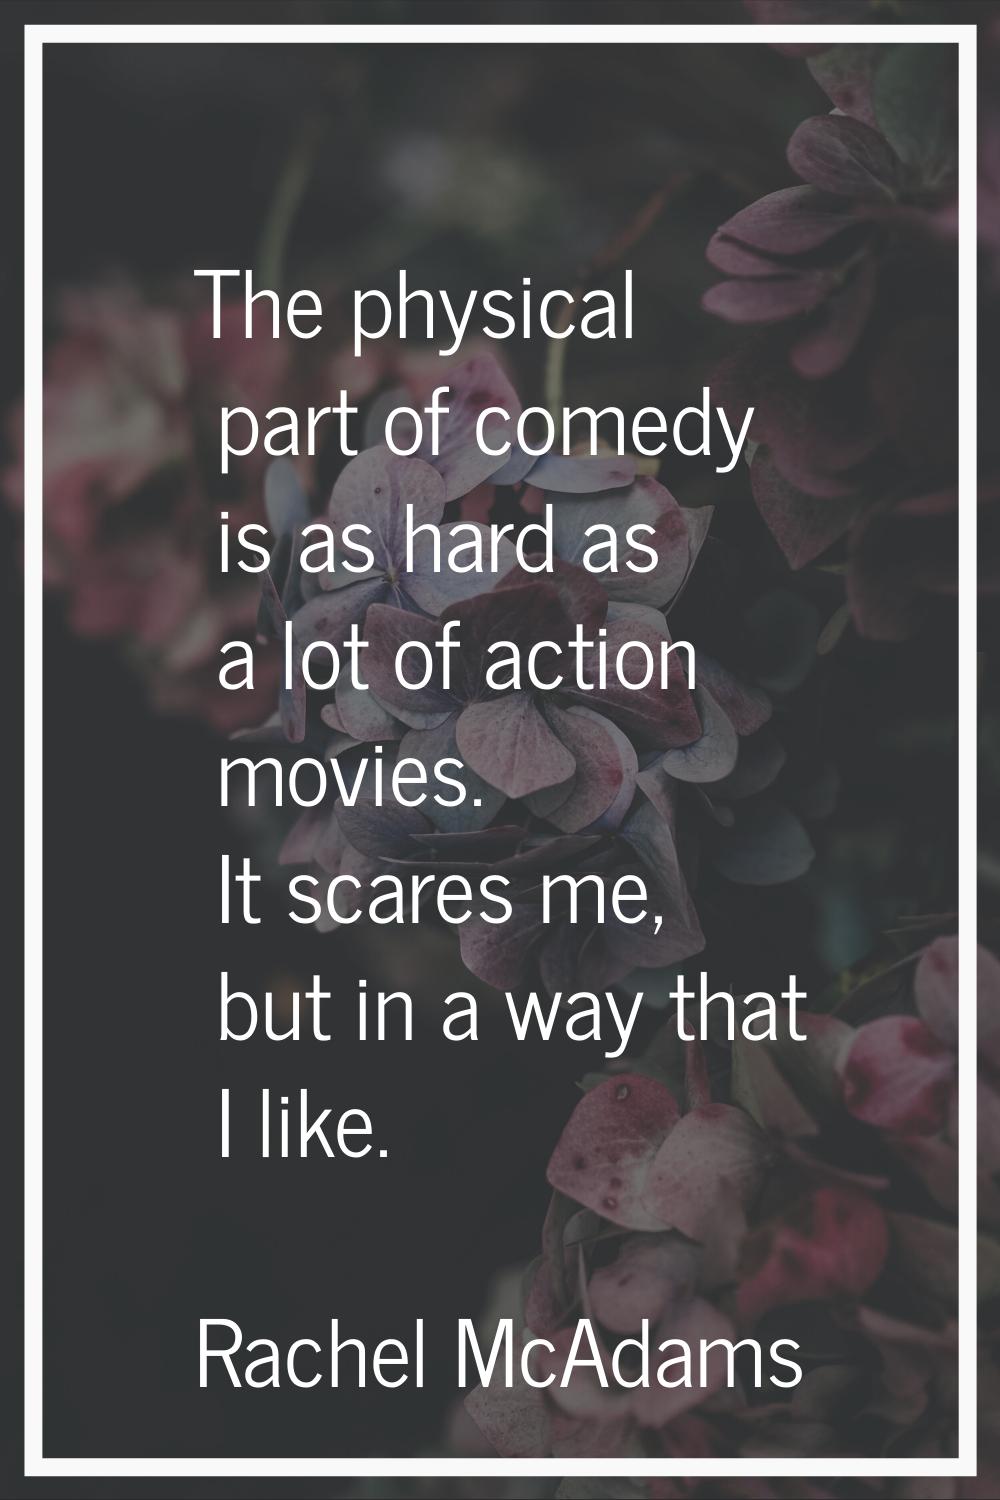 The physical part of comedy is as hard as a lot of action movies. It scares me, but in a way that I